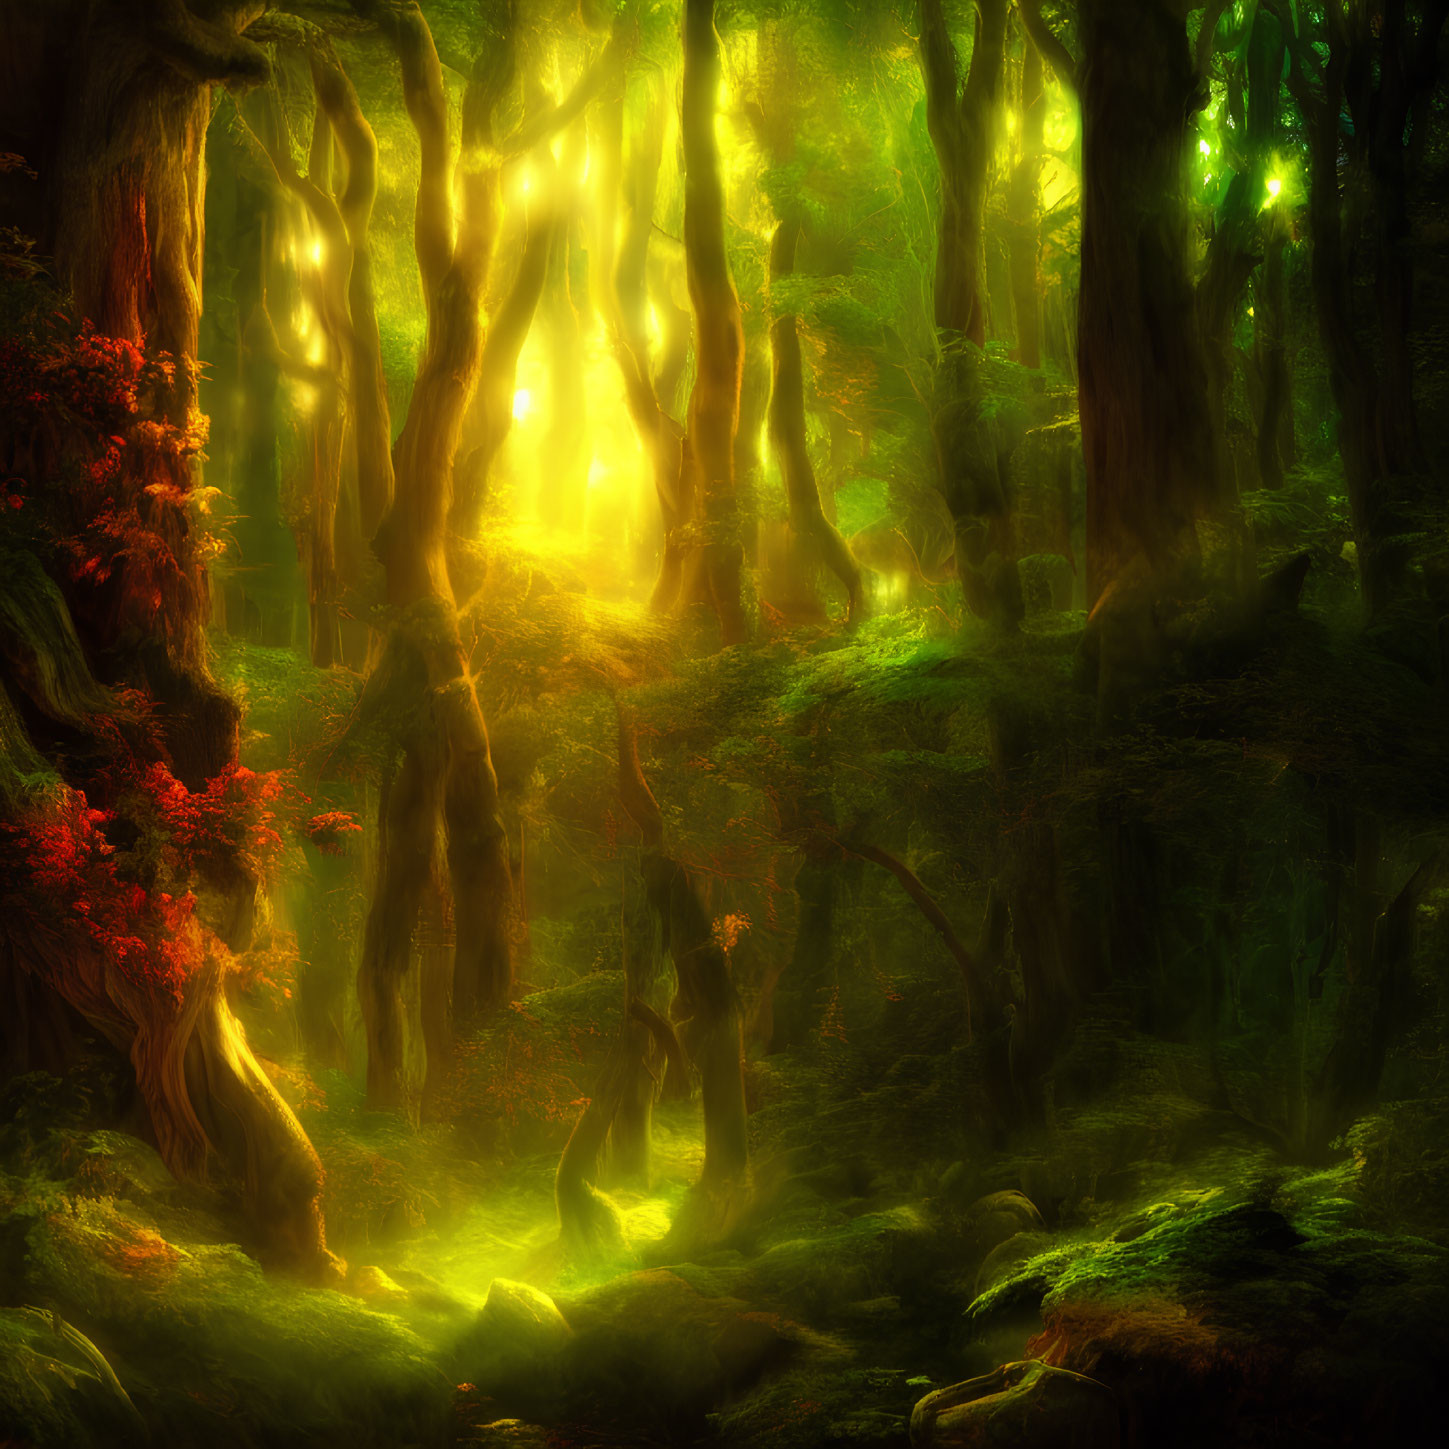 Enchanting forest with glowing lights and misty ambiance